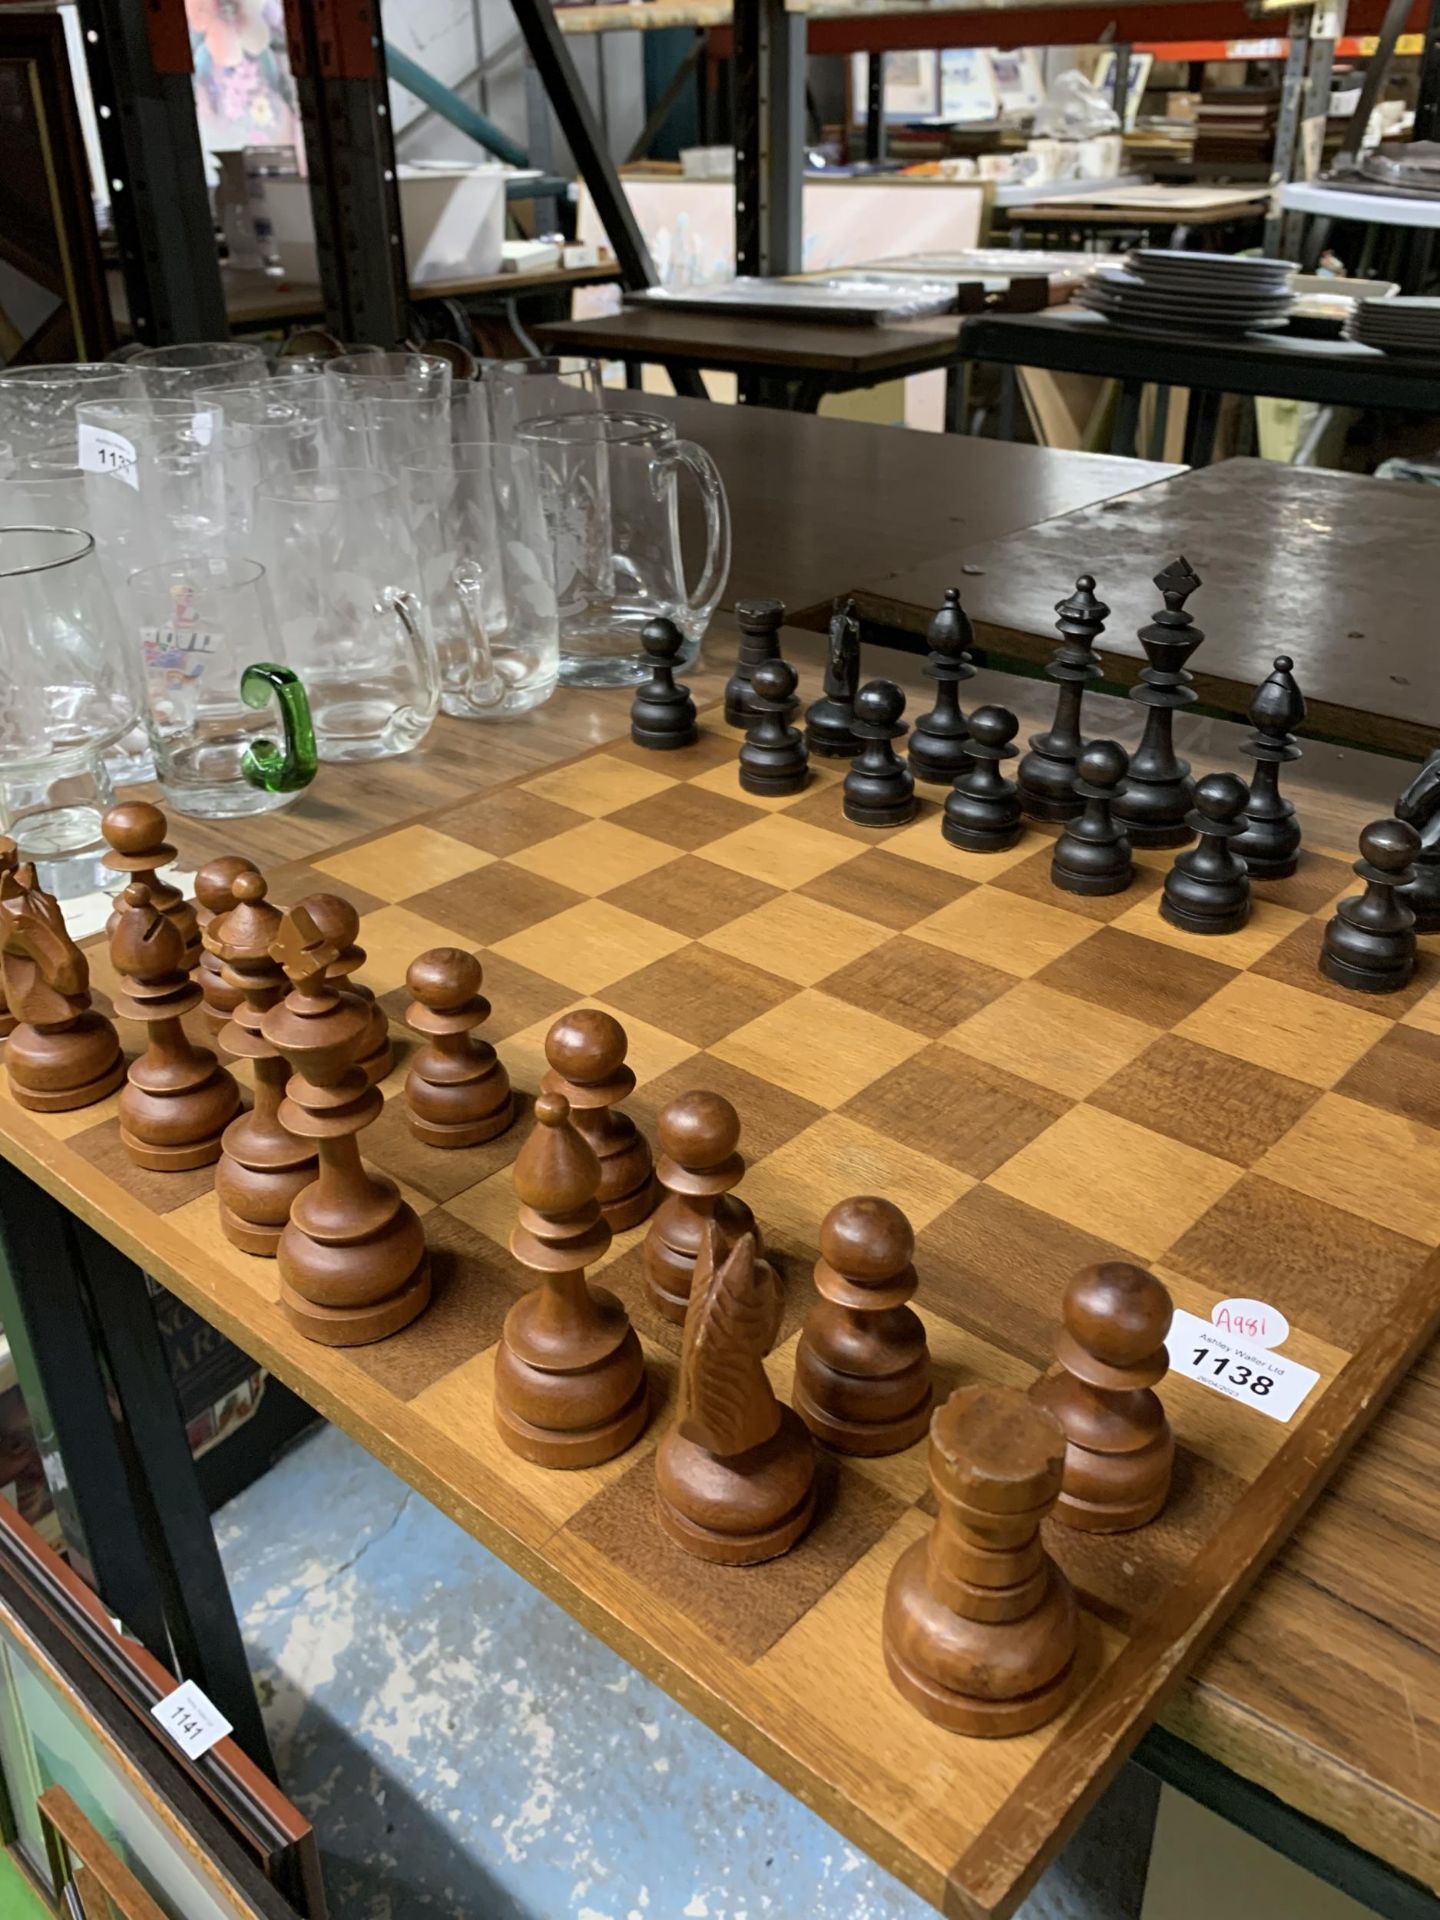 A LARGE WOODEN CHESSBOARD WITH A FULL SET OF WOODEN CHESS PIECES - Image 4 of 4